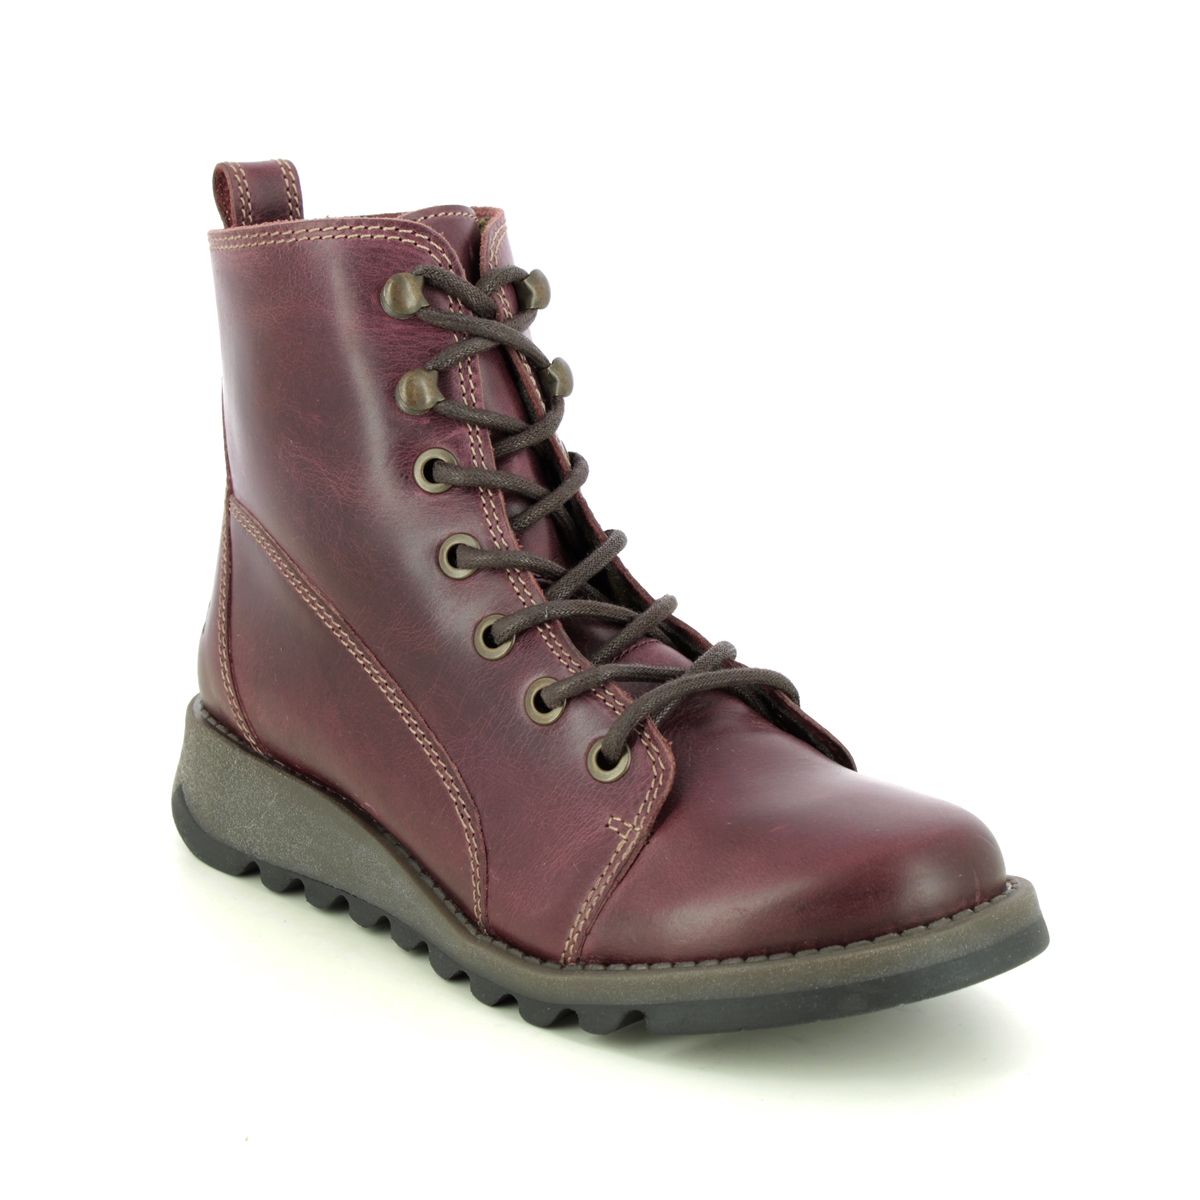 Fly London Sore  Sminx Purple Leather Womens Lace Up Boots P144813-001 in a Plain Leather in Size 40